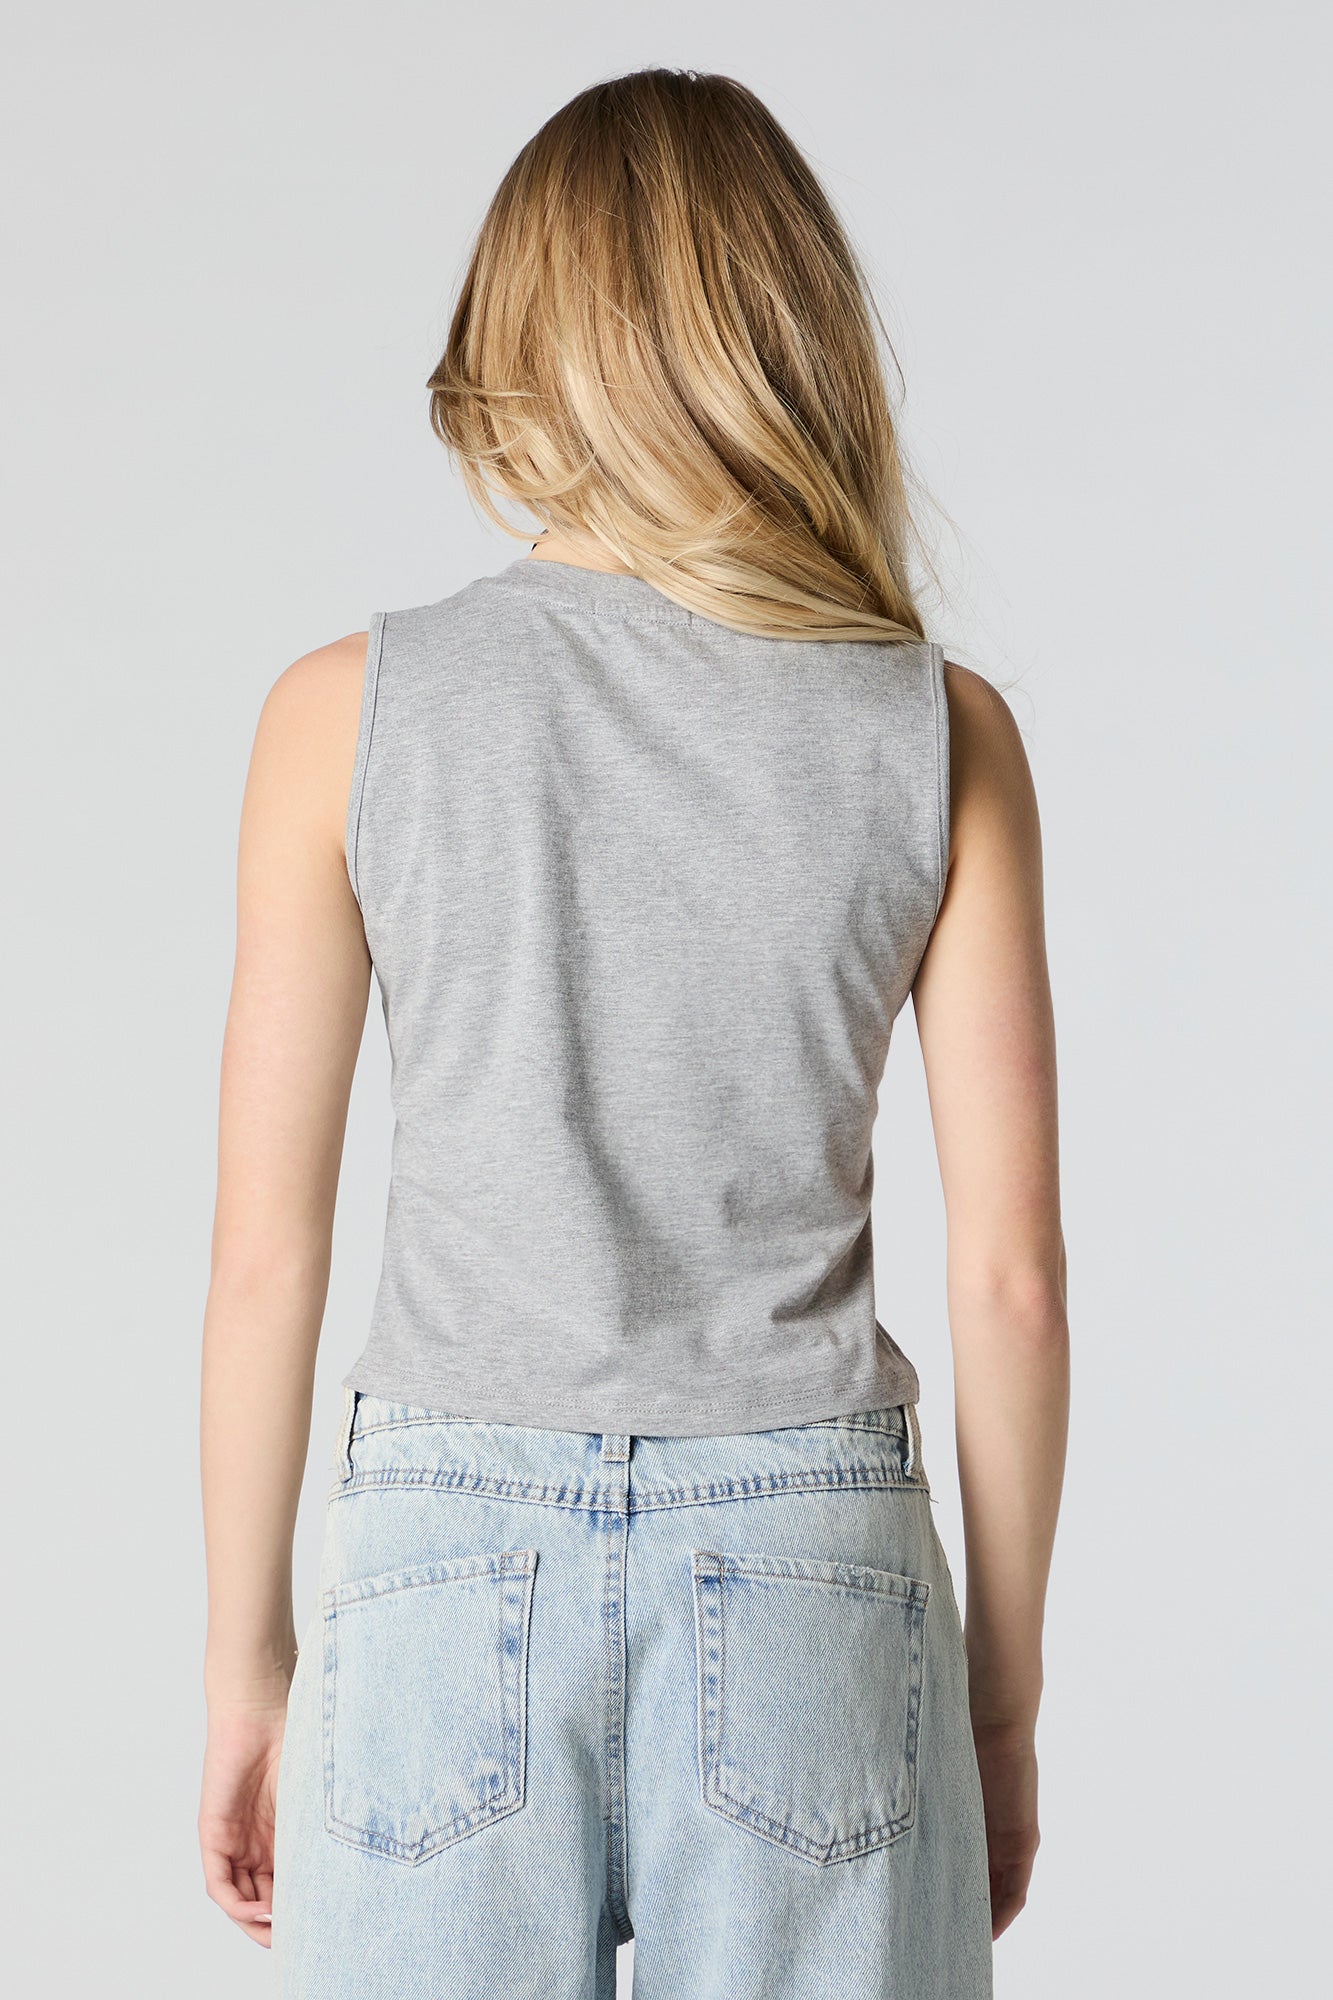 Brooklyn Embroidered Cropped Tank